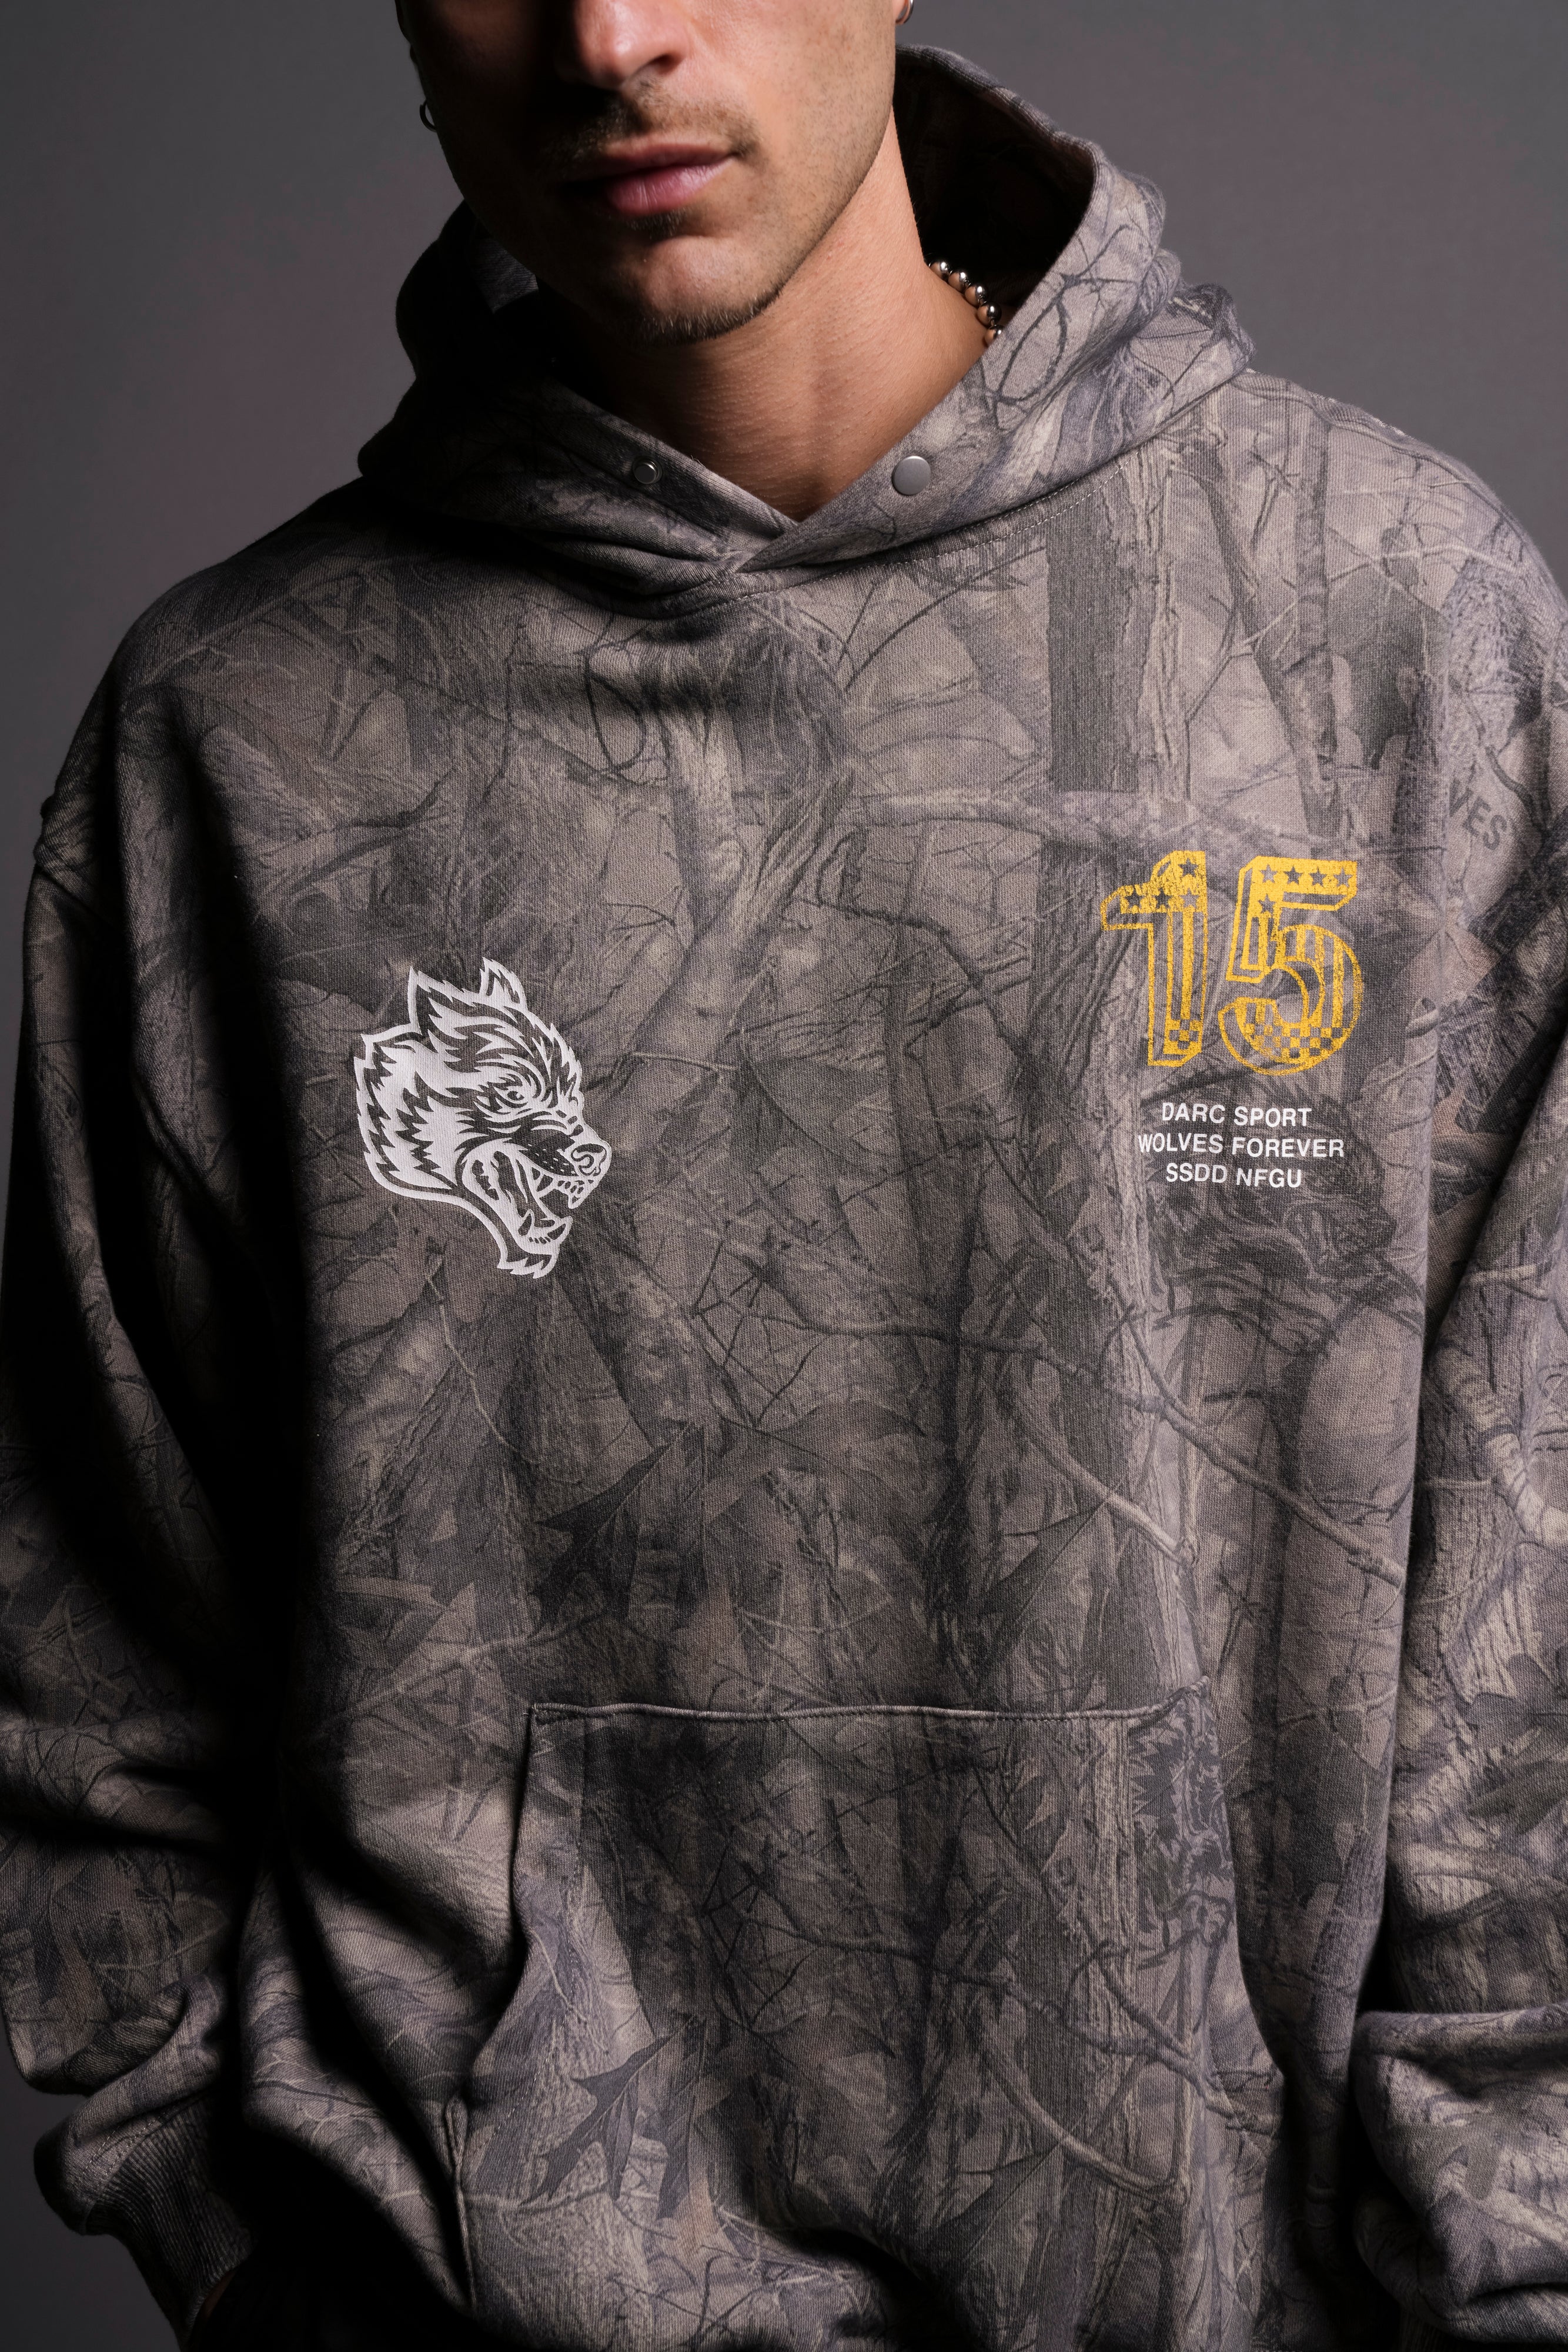 Life Moves Fast V2 "Vintage Pierce" Unisex Hoodie in Driftwood Wolf Forest Camo